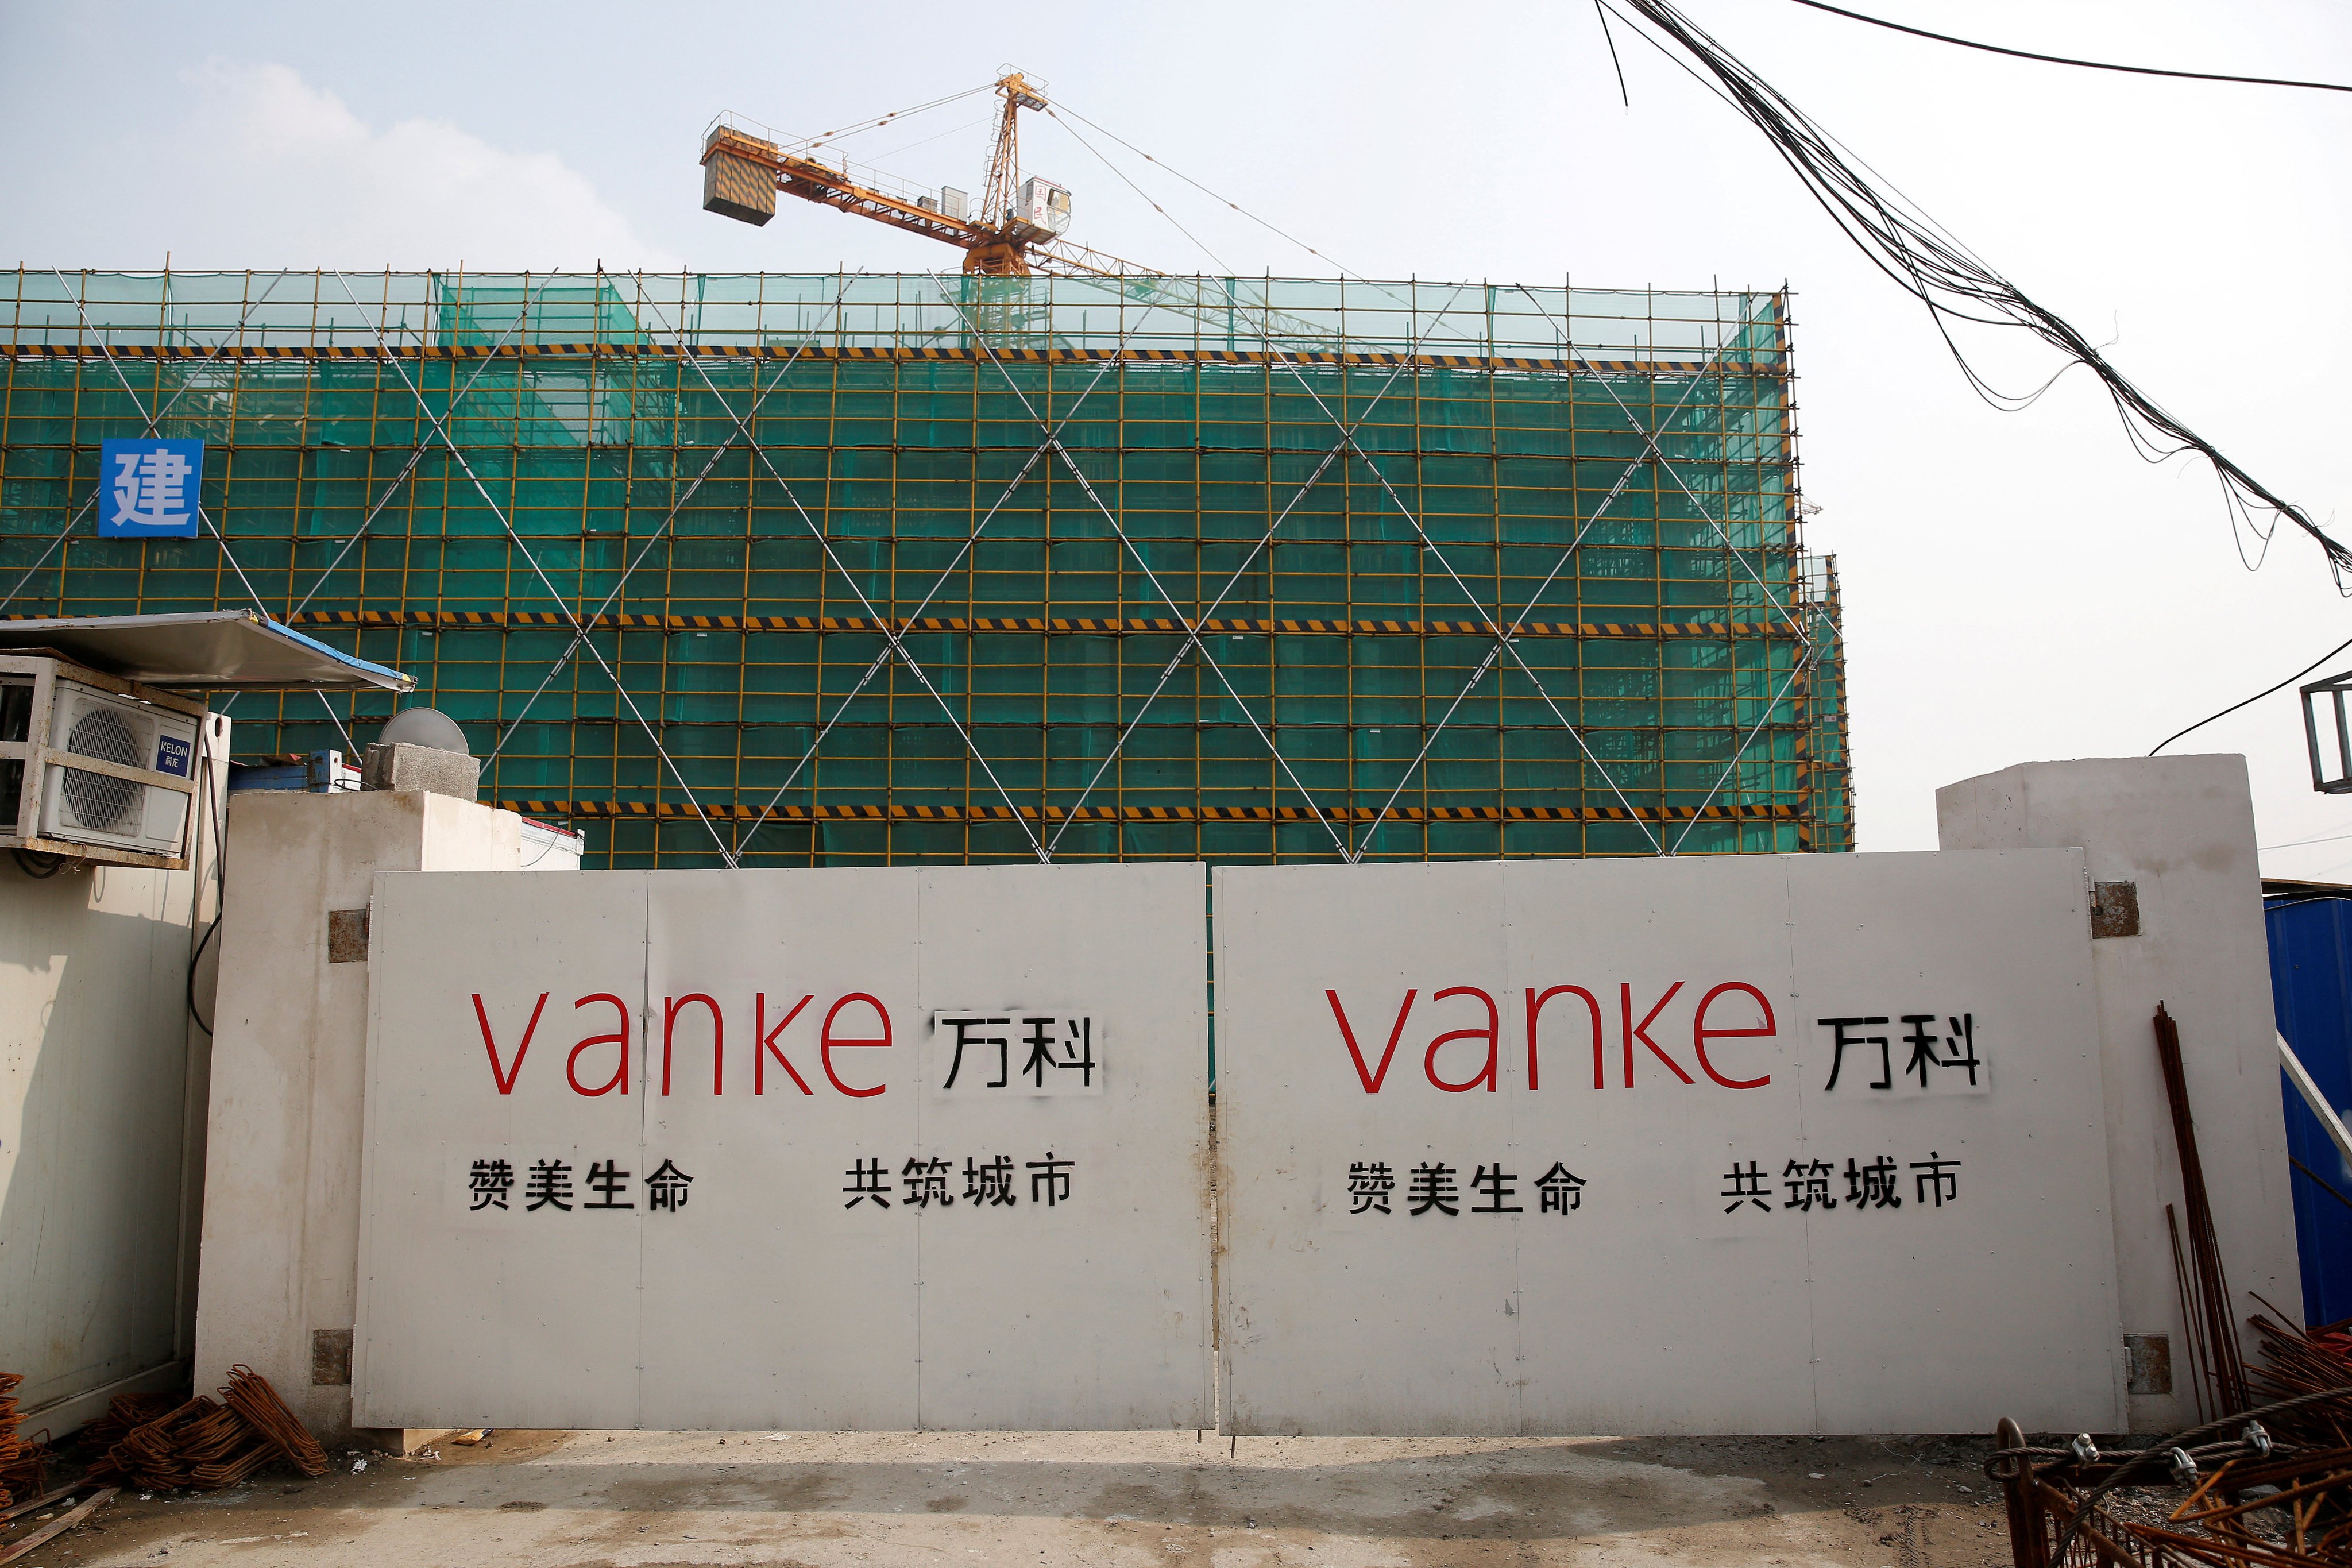 The logo of property developer China Vanke is seen on gates at a construction site in Shanghai, China, March 21, 2017. Photo: Reuters